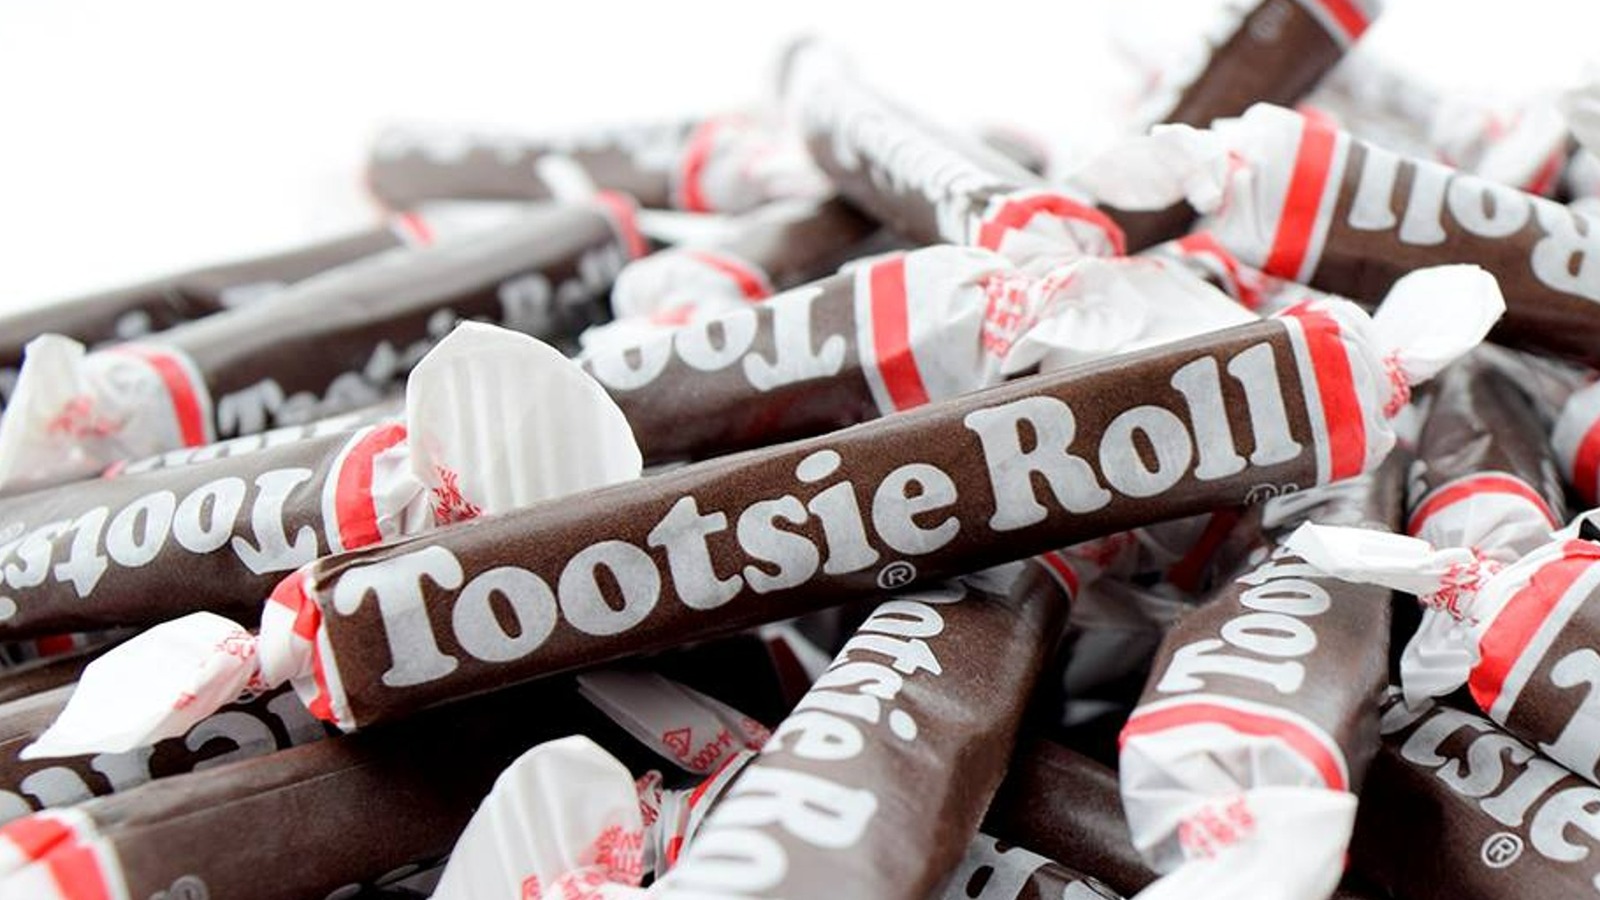 We Finally Know How Tootsie Rolls Are Made